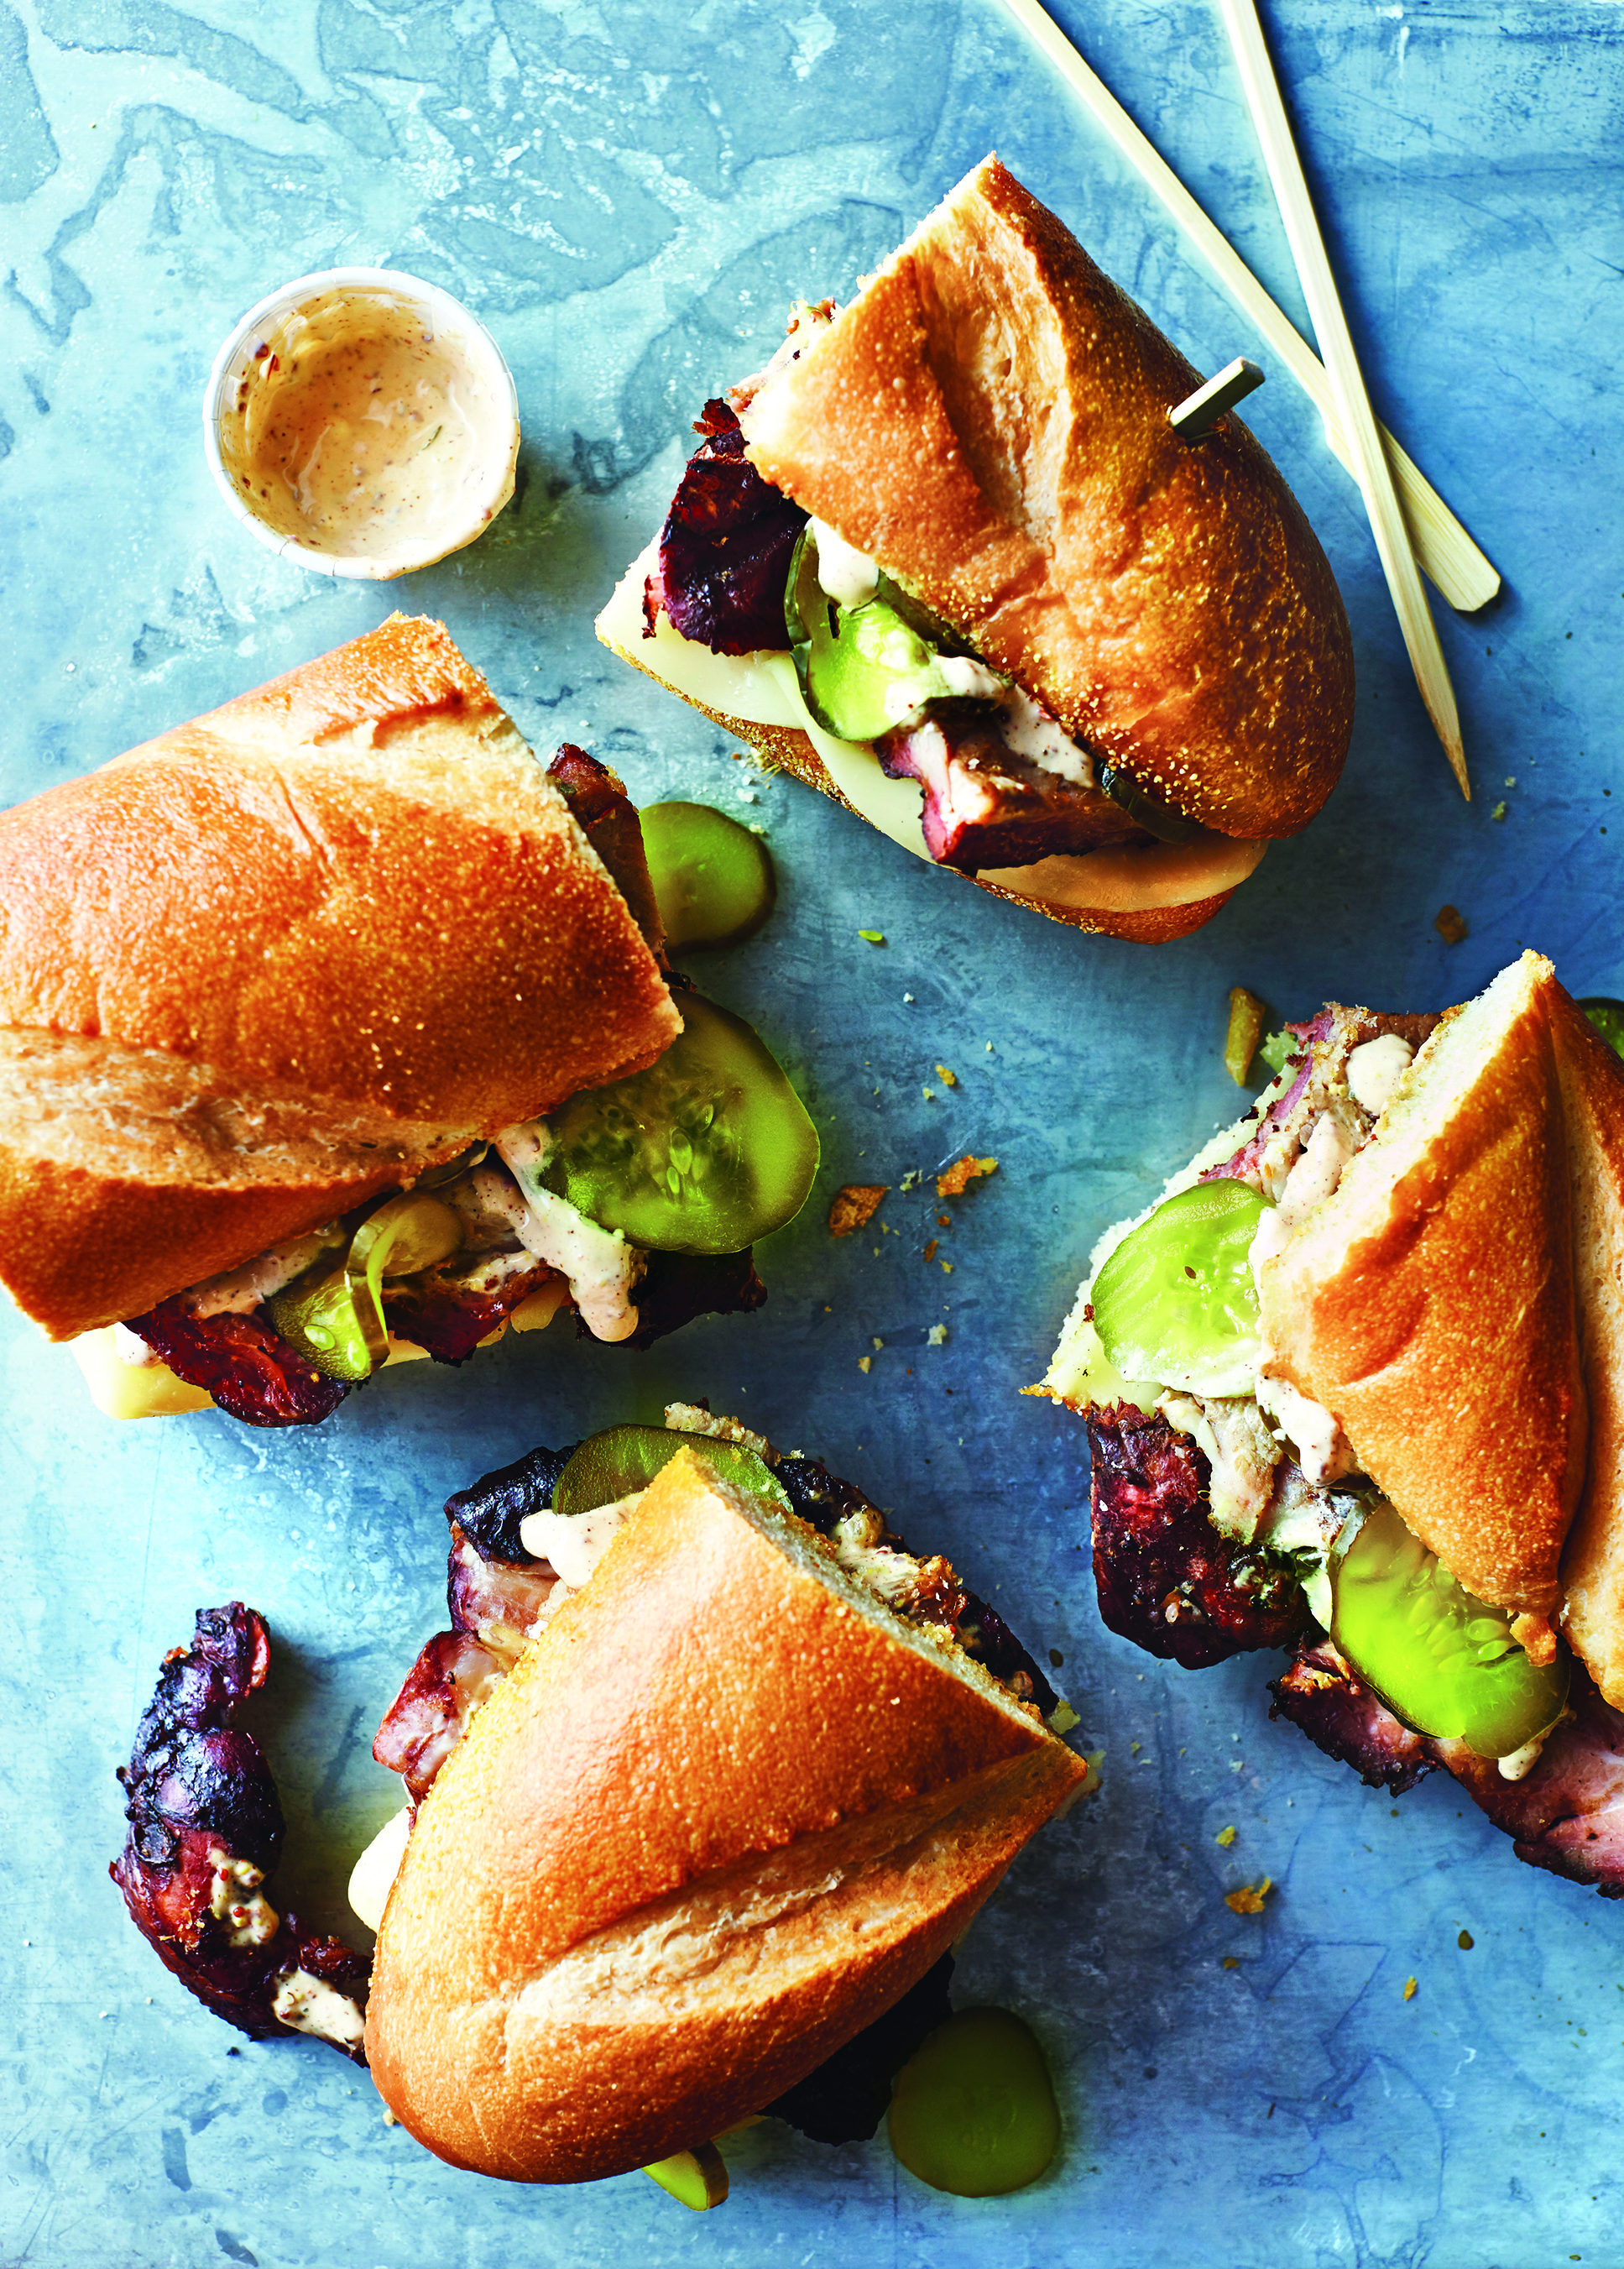 A twist on the traditional Cuban sandwich, these pork sandwiches are made with a Chipotle Rémoulade, making them the perfect combination of sweet, savory and spicy!